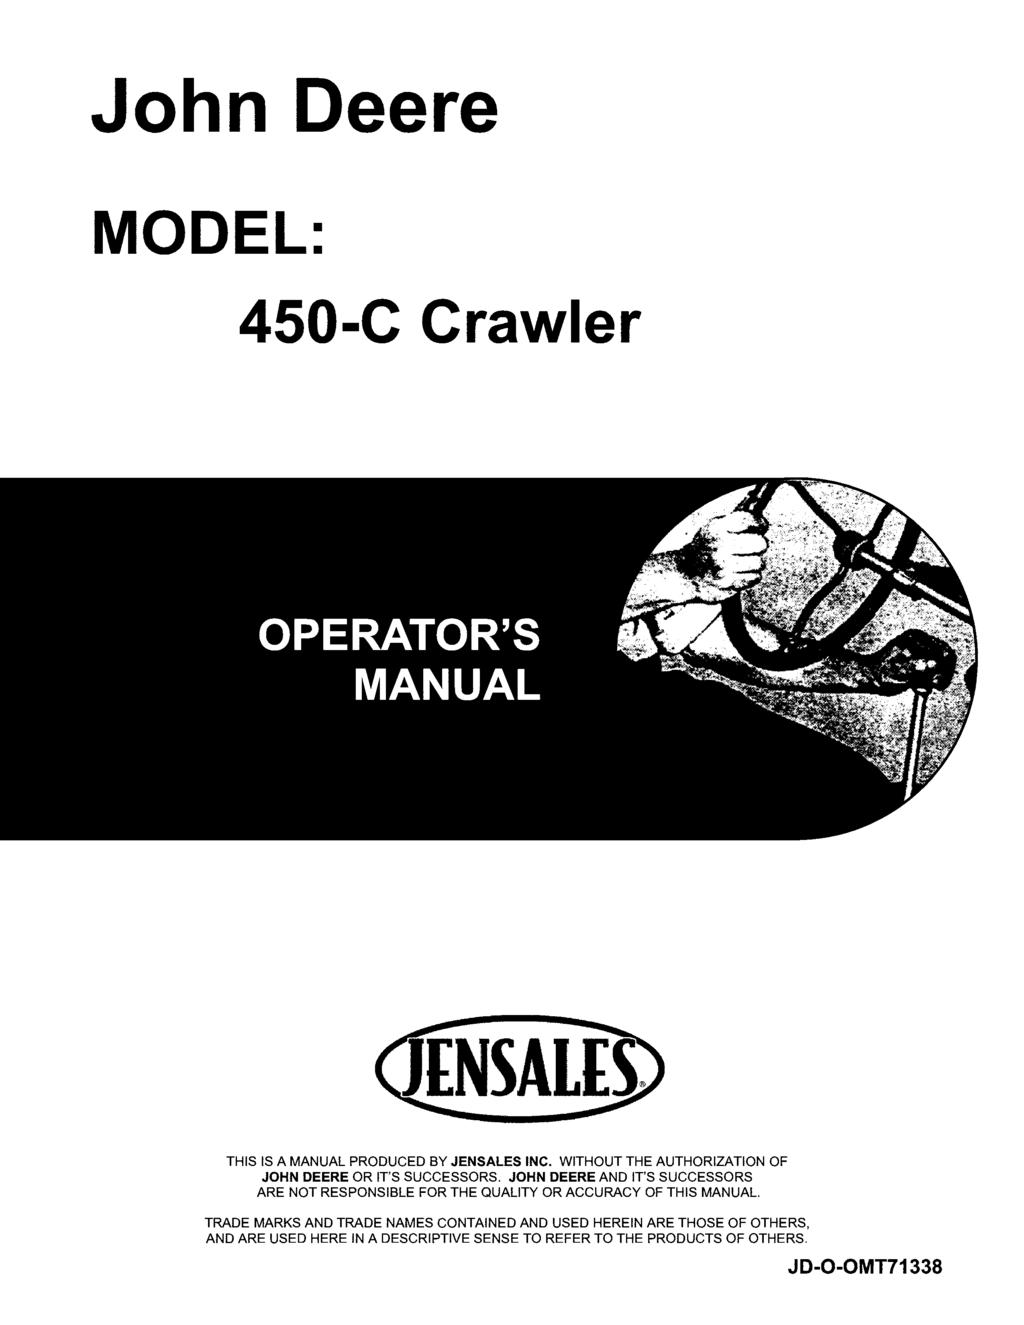 John Deere MODEL: 450-C Crawler THIS IS A MANUAL PRODUCED BY JENSALES INC. WITHOUT THE AUTHORIZATION OF JOHN DEERE OR IT'S SUCCESSORS.